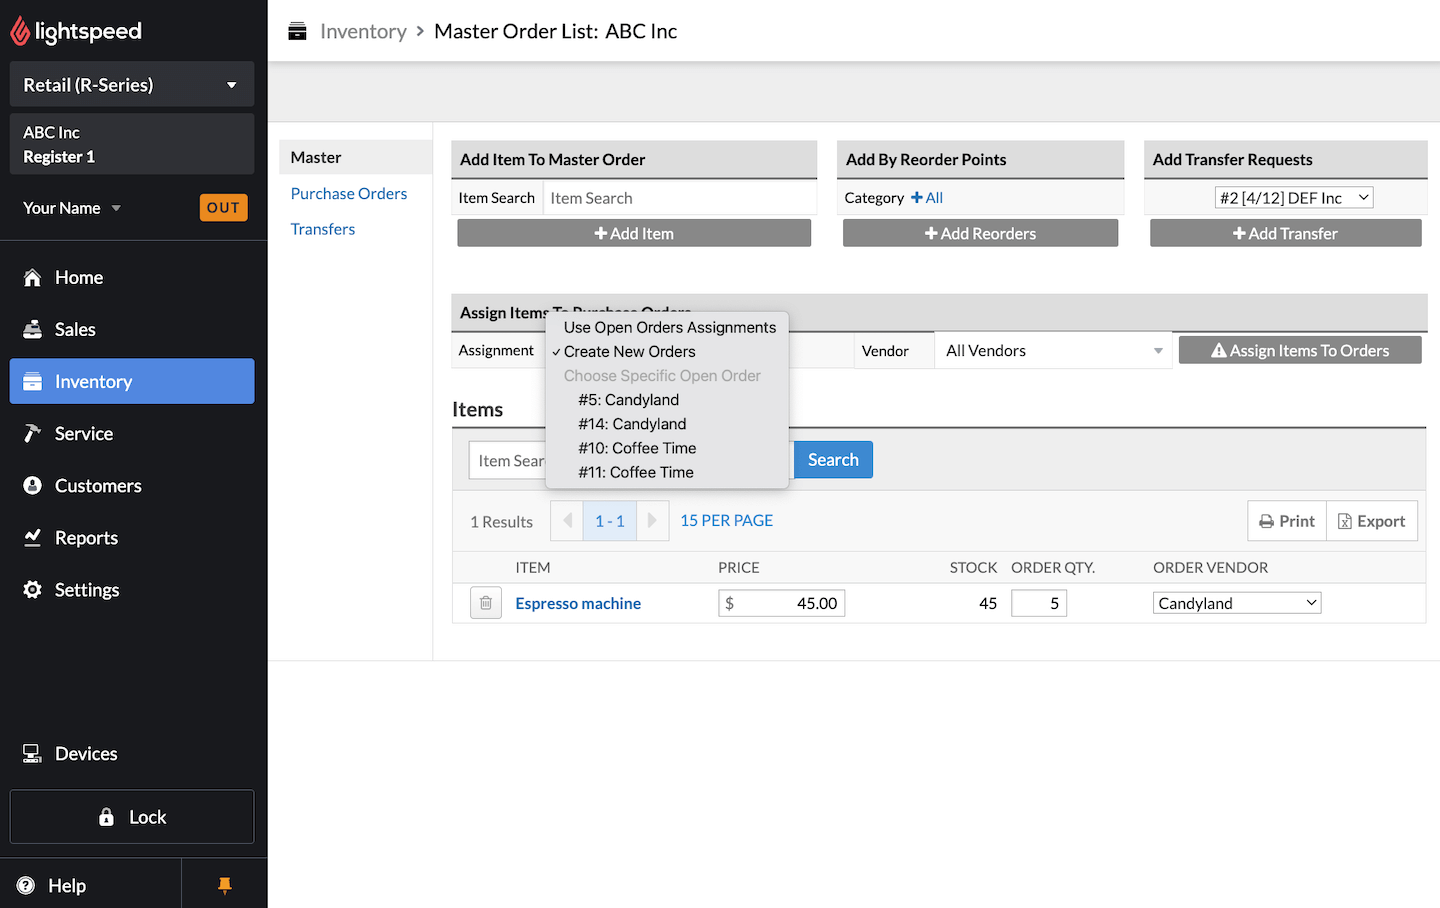 Master Order section, with Assignment drop-down open showing options to Use Open Orders Assignments, Create New Orders, or choose an individual specific order.